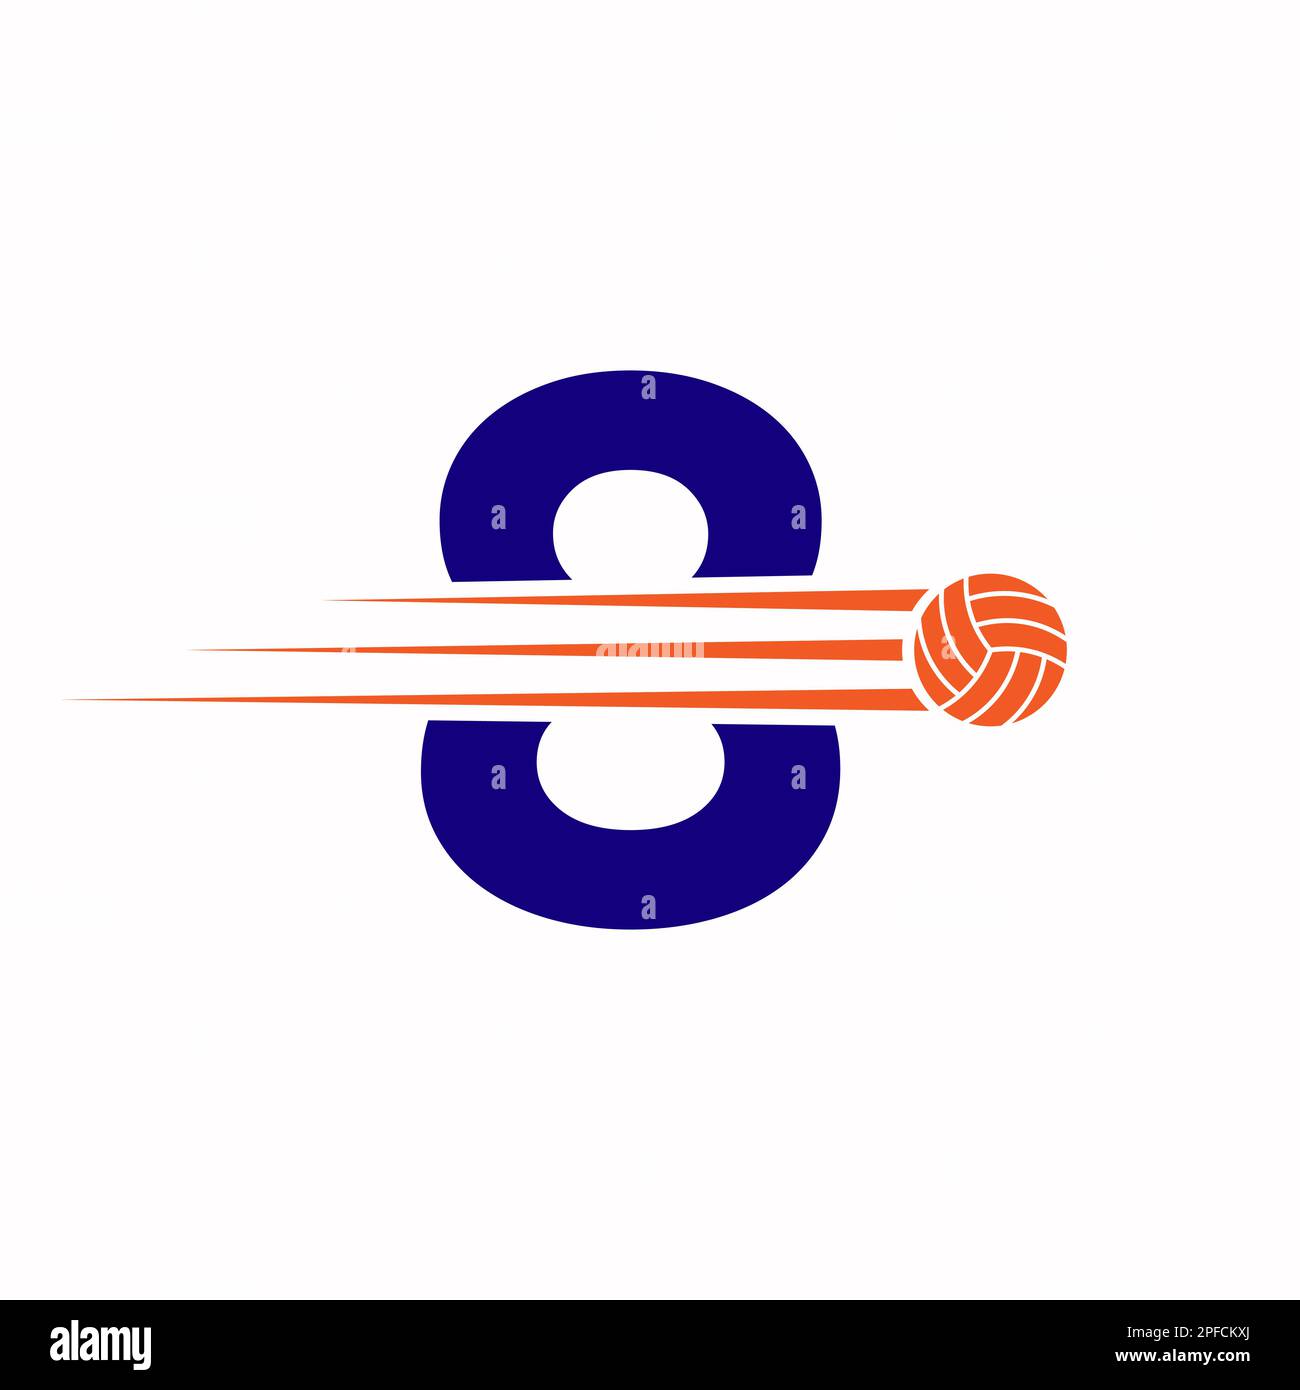 Initial Letter 8 Volleyball Logo Design Sign. Volleyball Sports Logotype Stock Vector